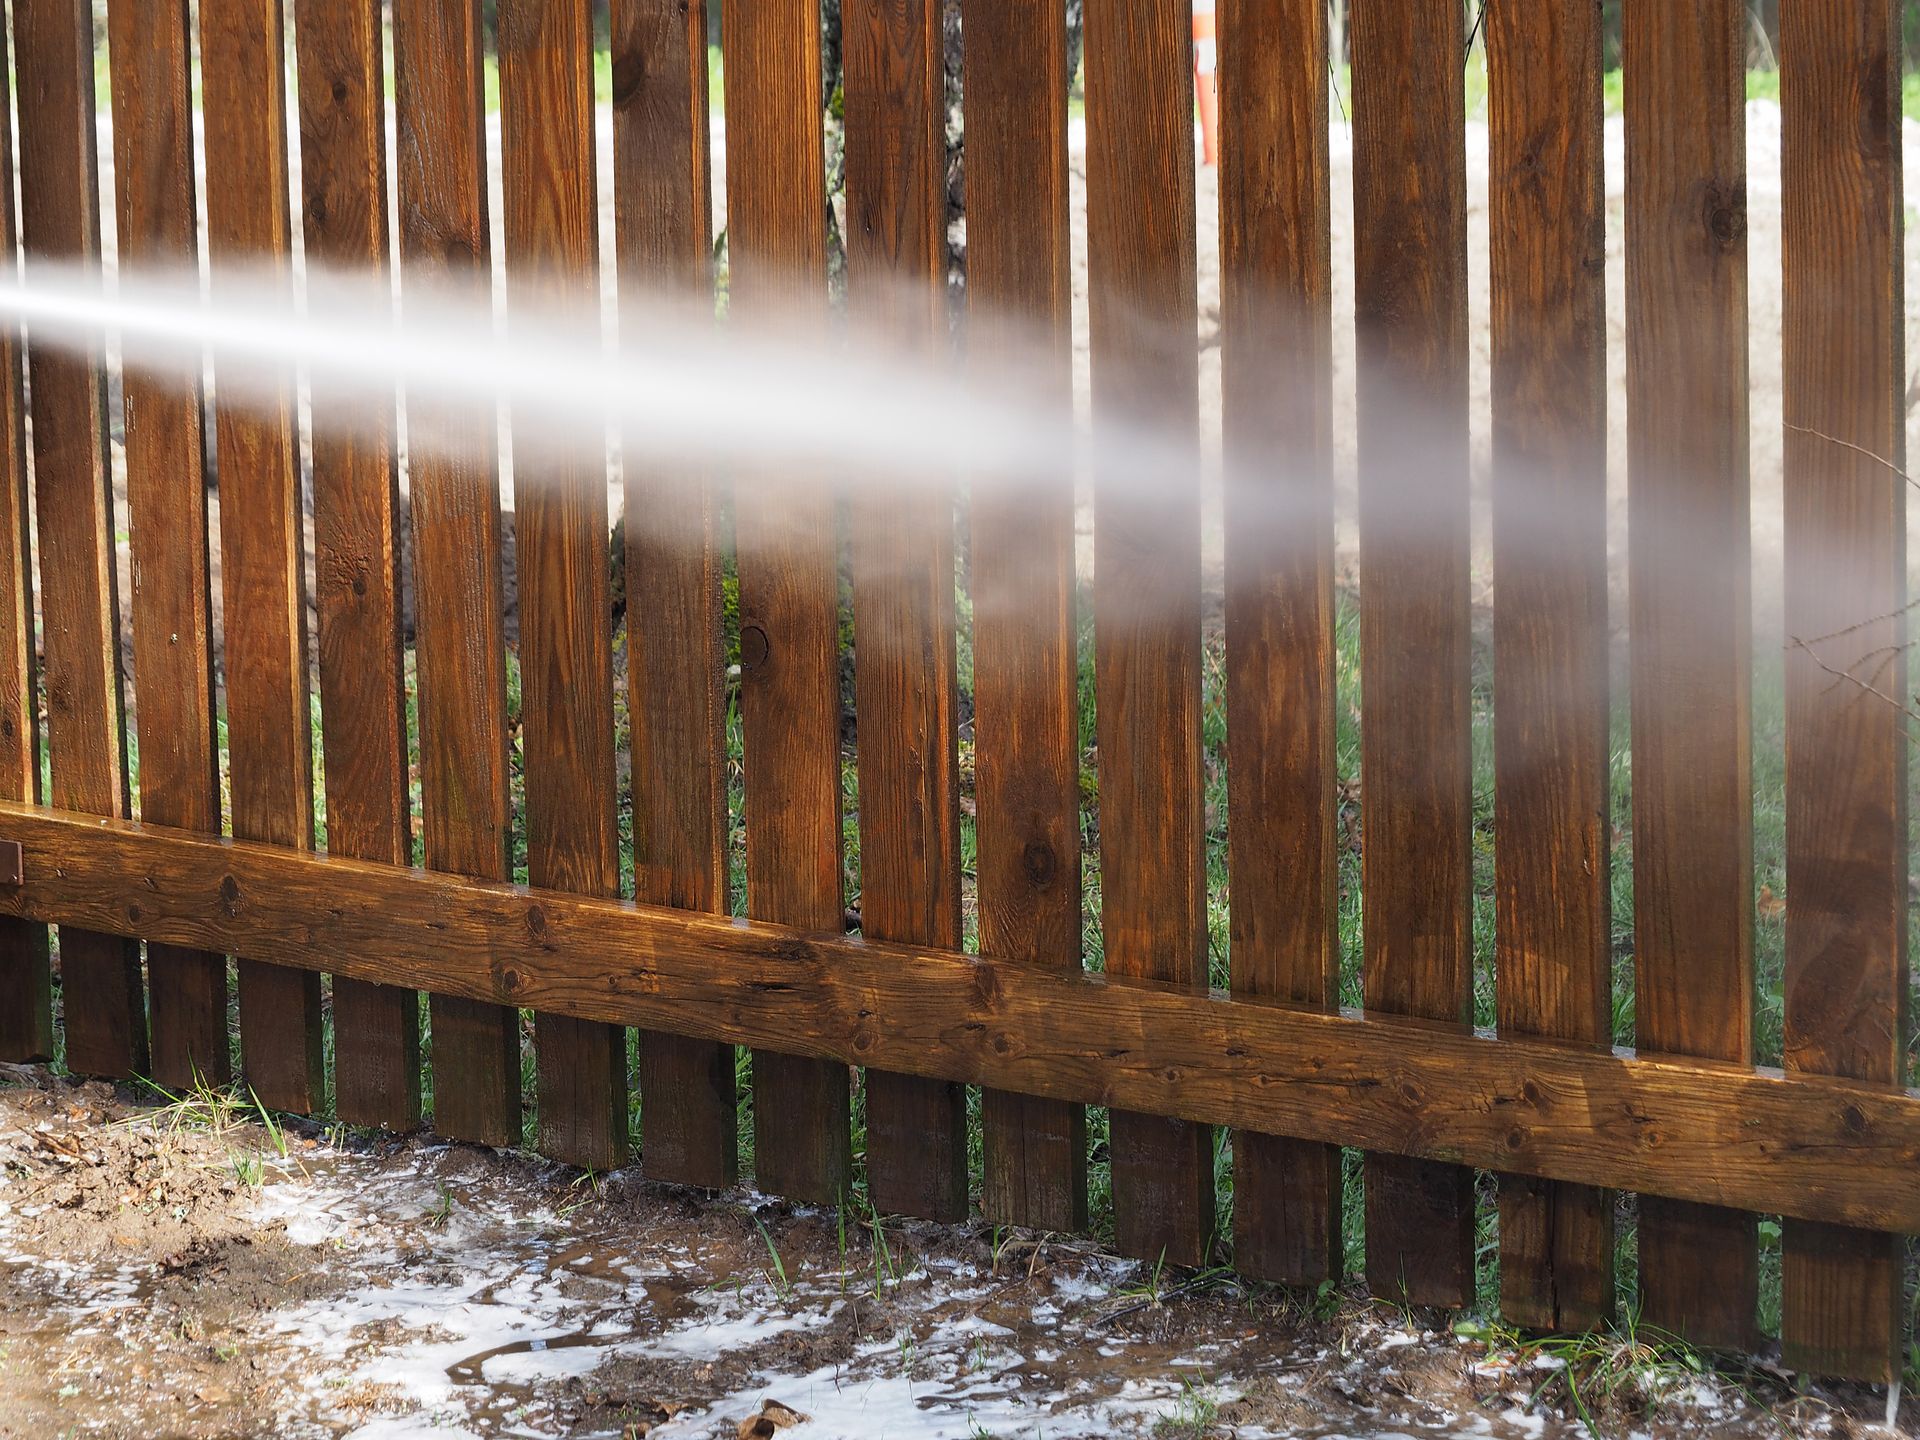 An individual power washes a wooden fence, removing dirt and grime, restoring its natural beauty.